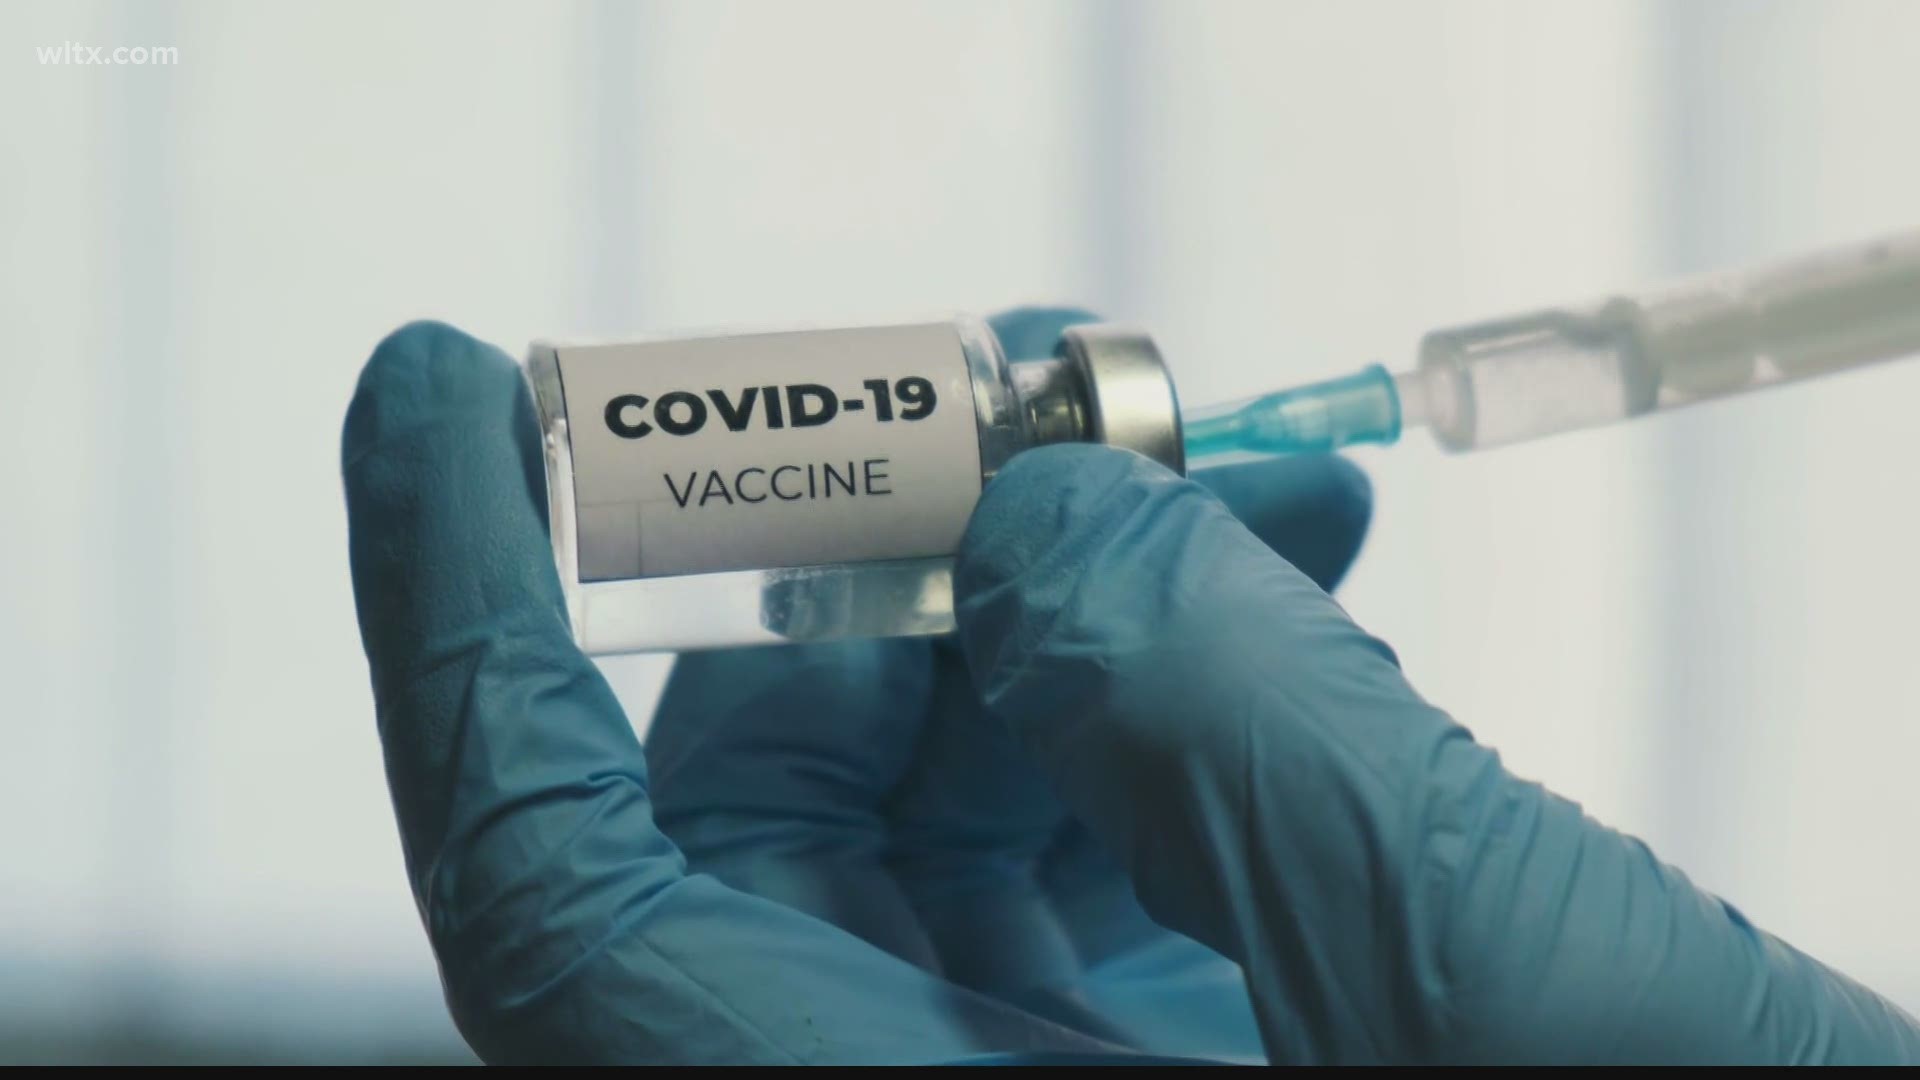 16 and 17-year-olds can now register for a COVID-19 vaccine in South Carolina, and they can get the vaccine without parental consent.